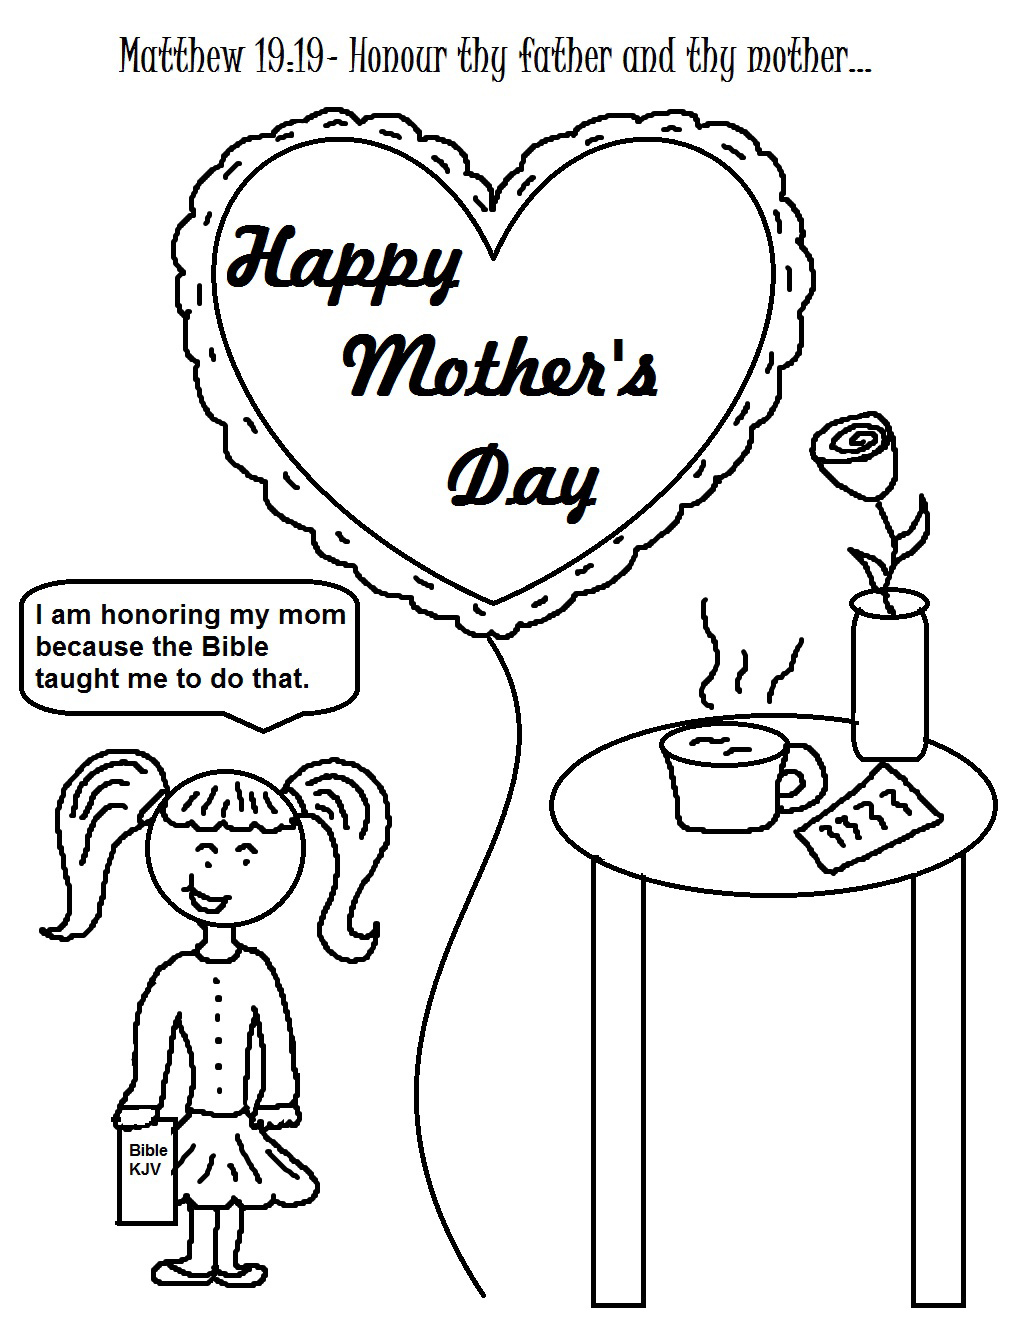 Free Coloring Pages: Mothers Day Coloring Pages For Children